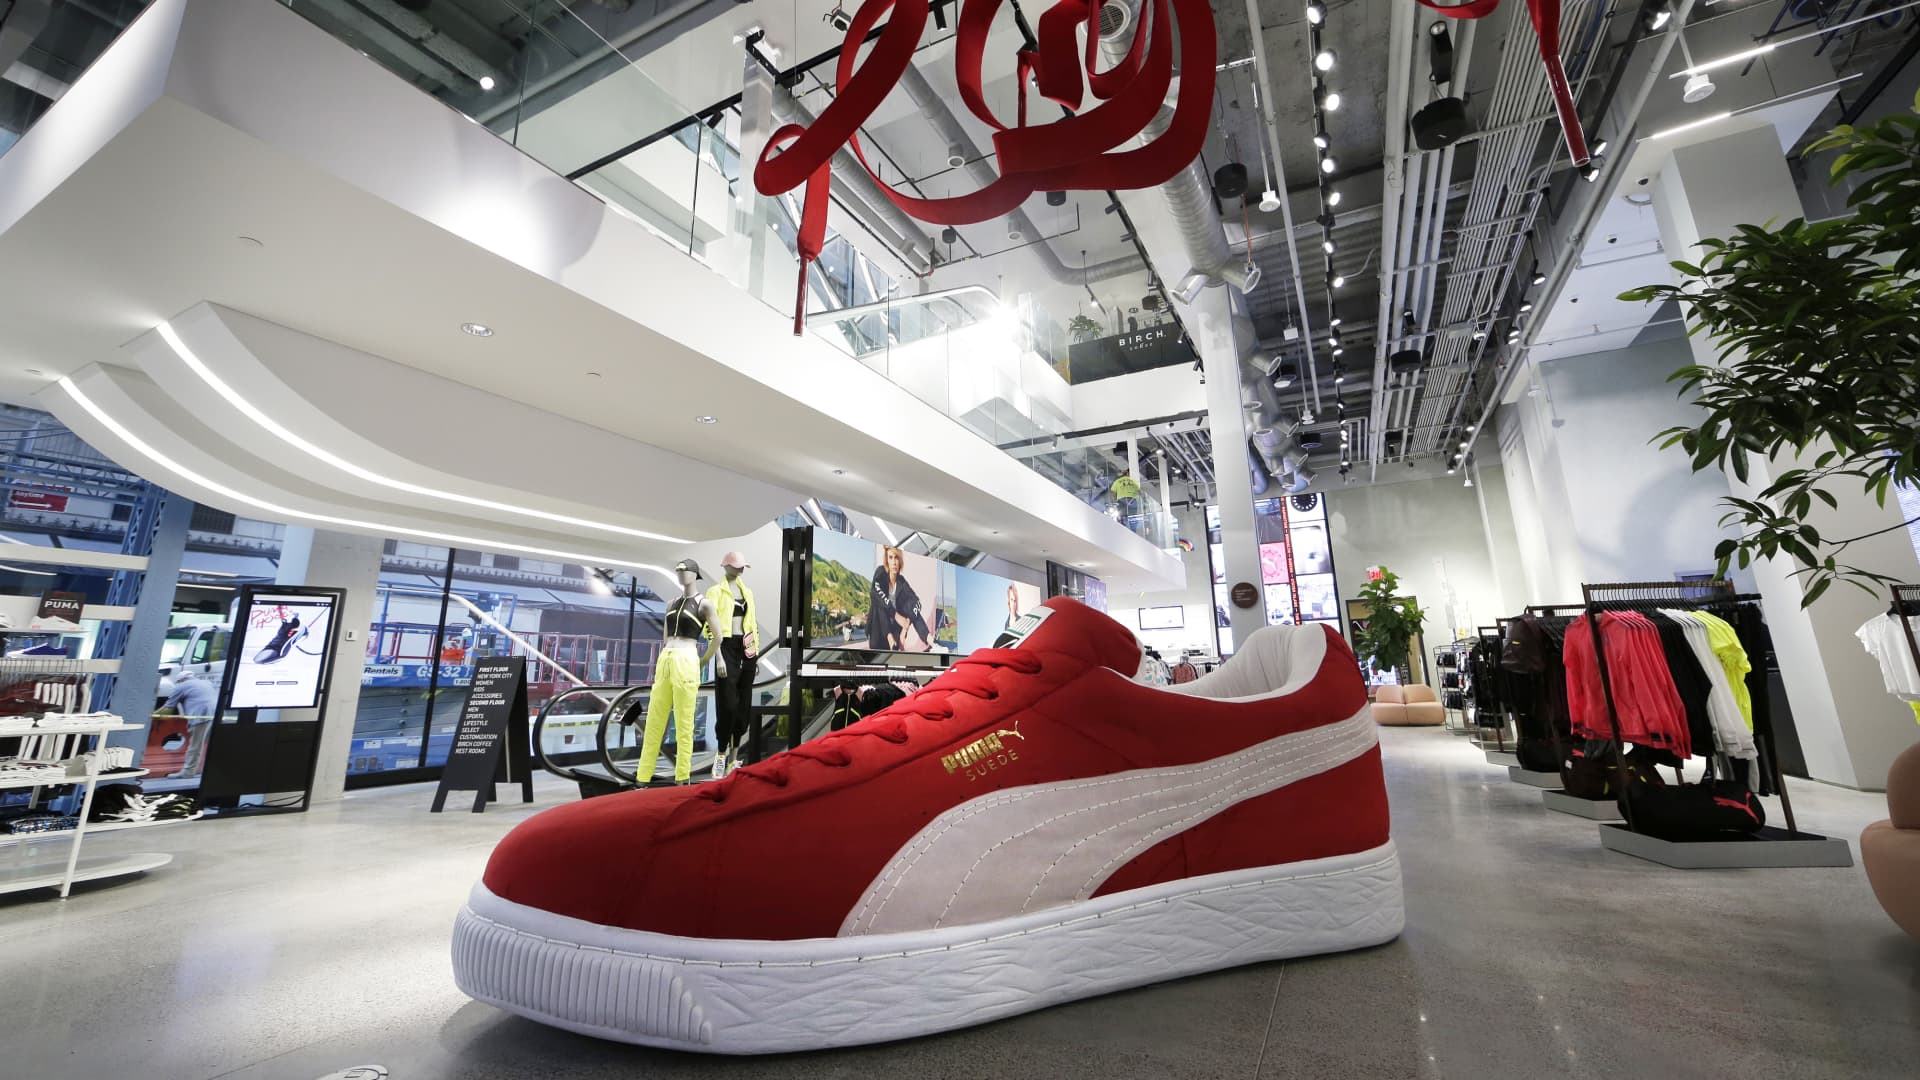 subterraneo tranquilo Espinoso Puma is opening a massive store on Fifth Avenue. Here's a first look